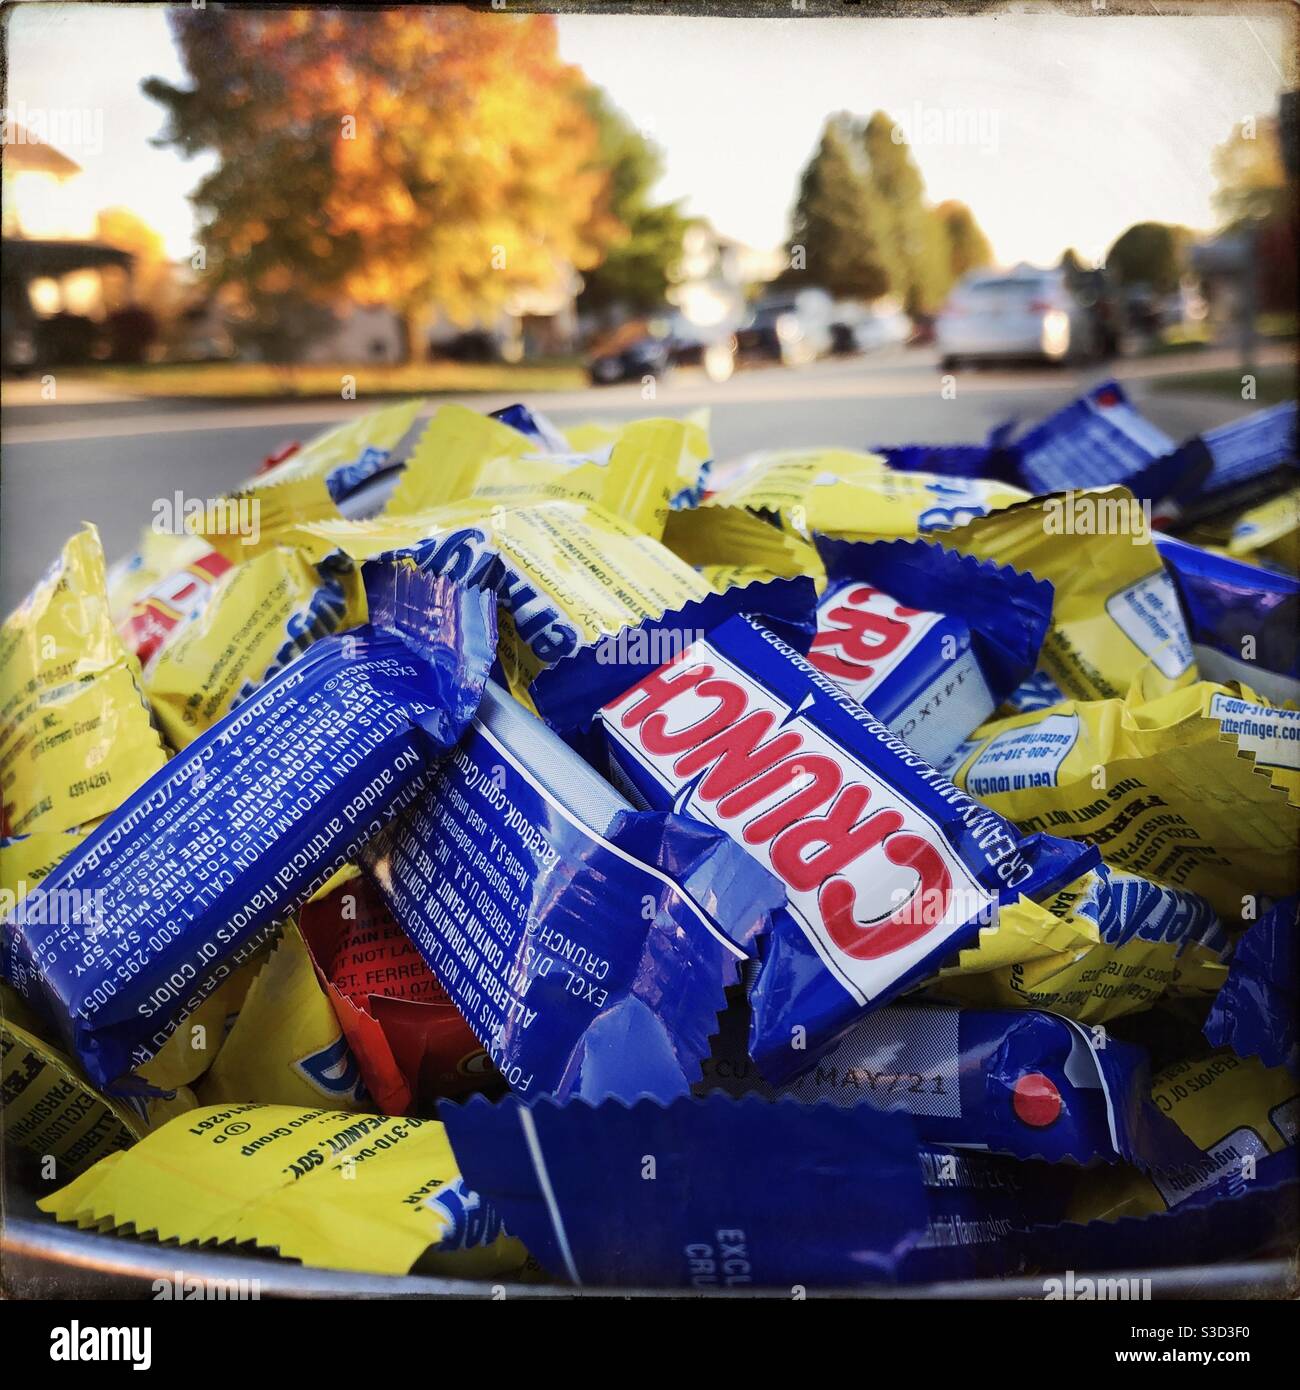 A bowl full of chocolate candy bars ready for trick or treat.  Brand name bars included are Butterfingers and Crunch. Stock Photo